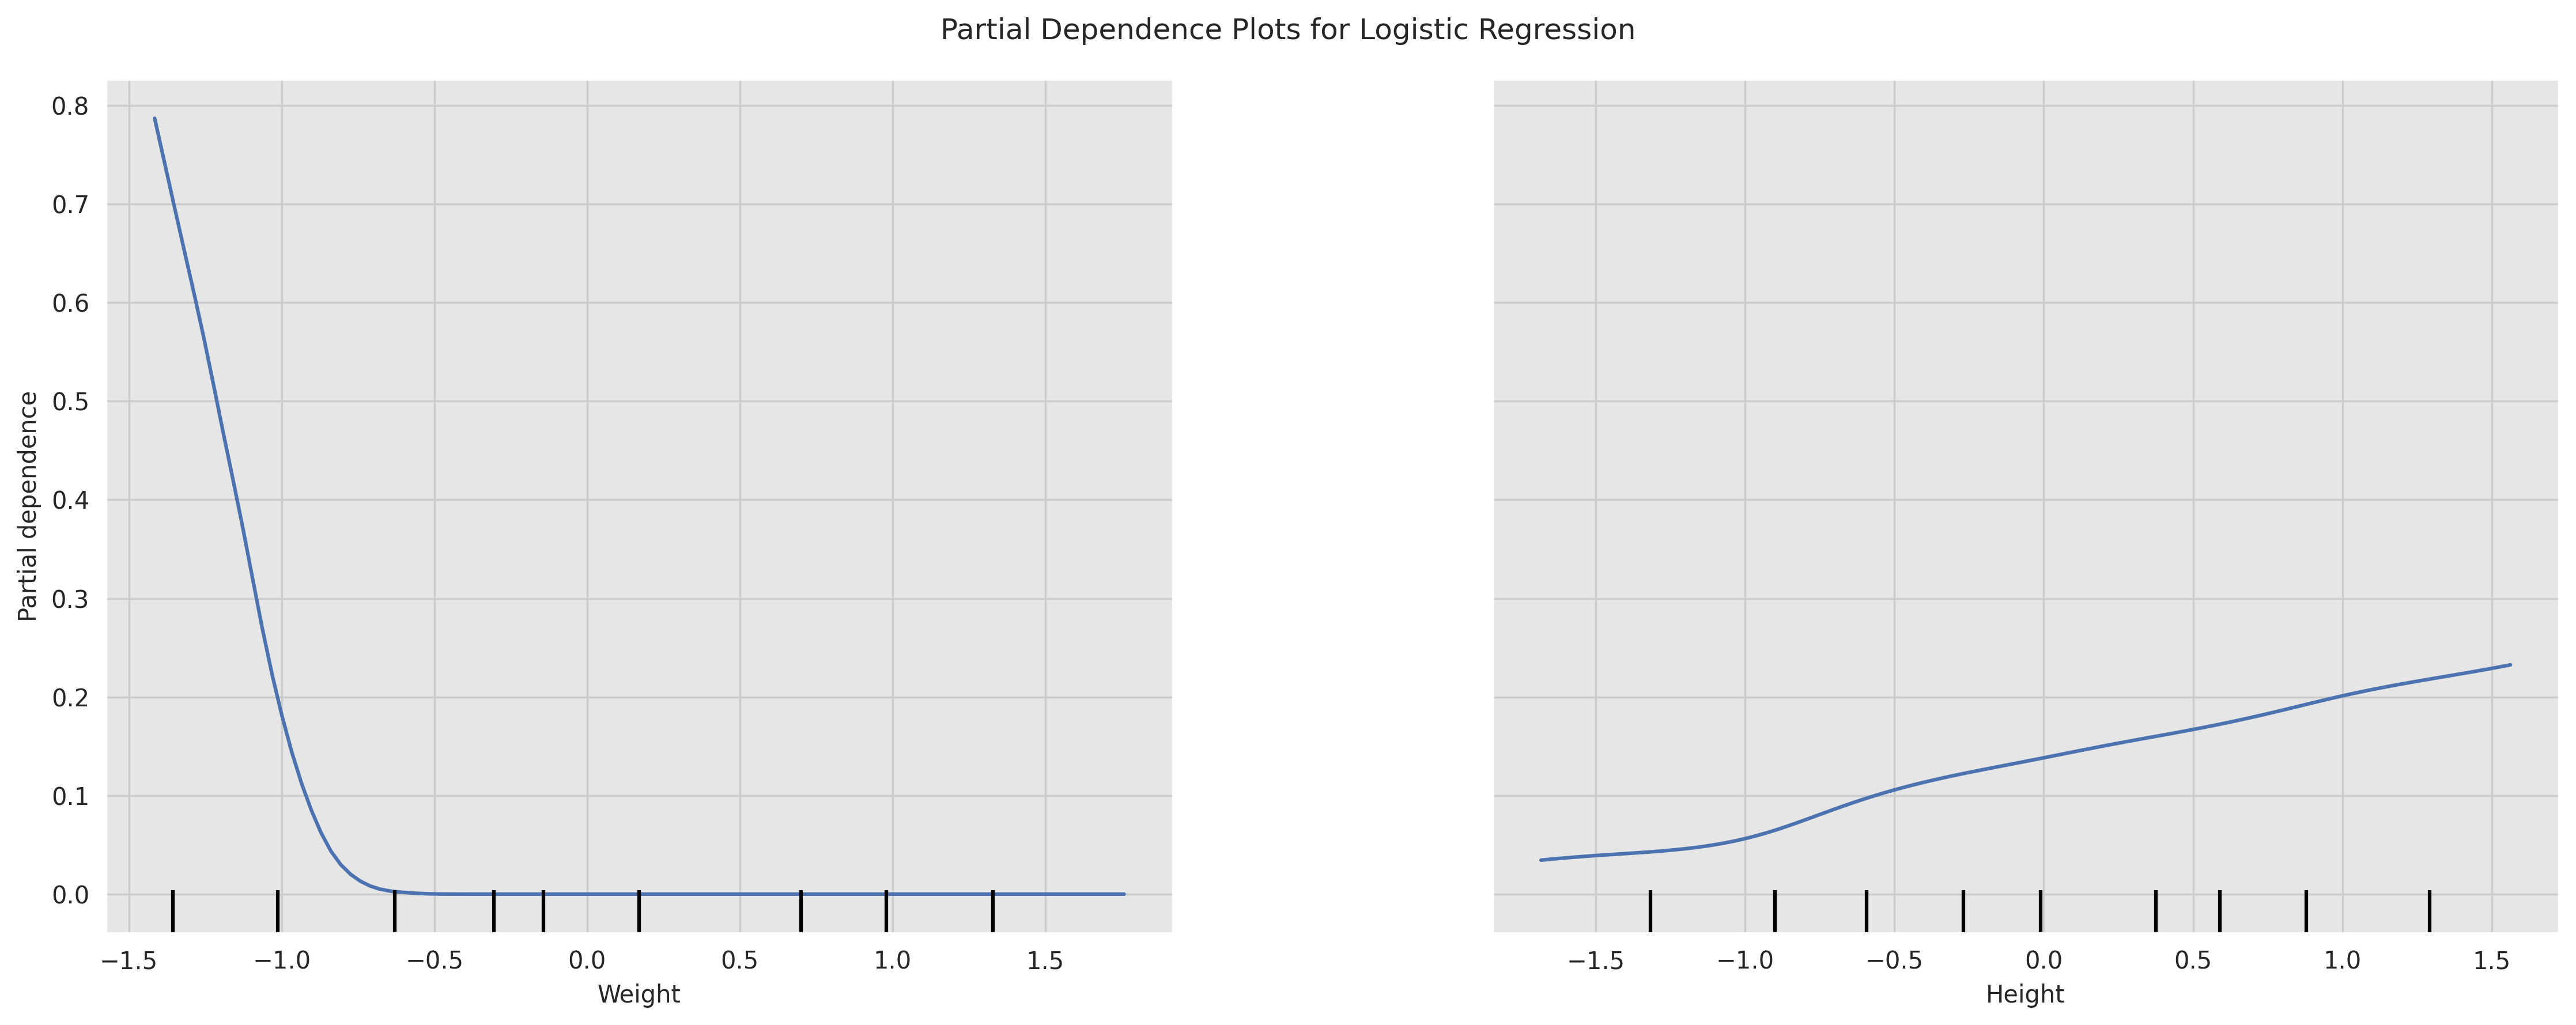 Partial Dependence Plot